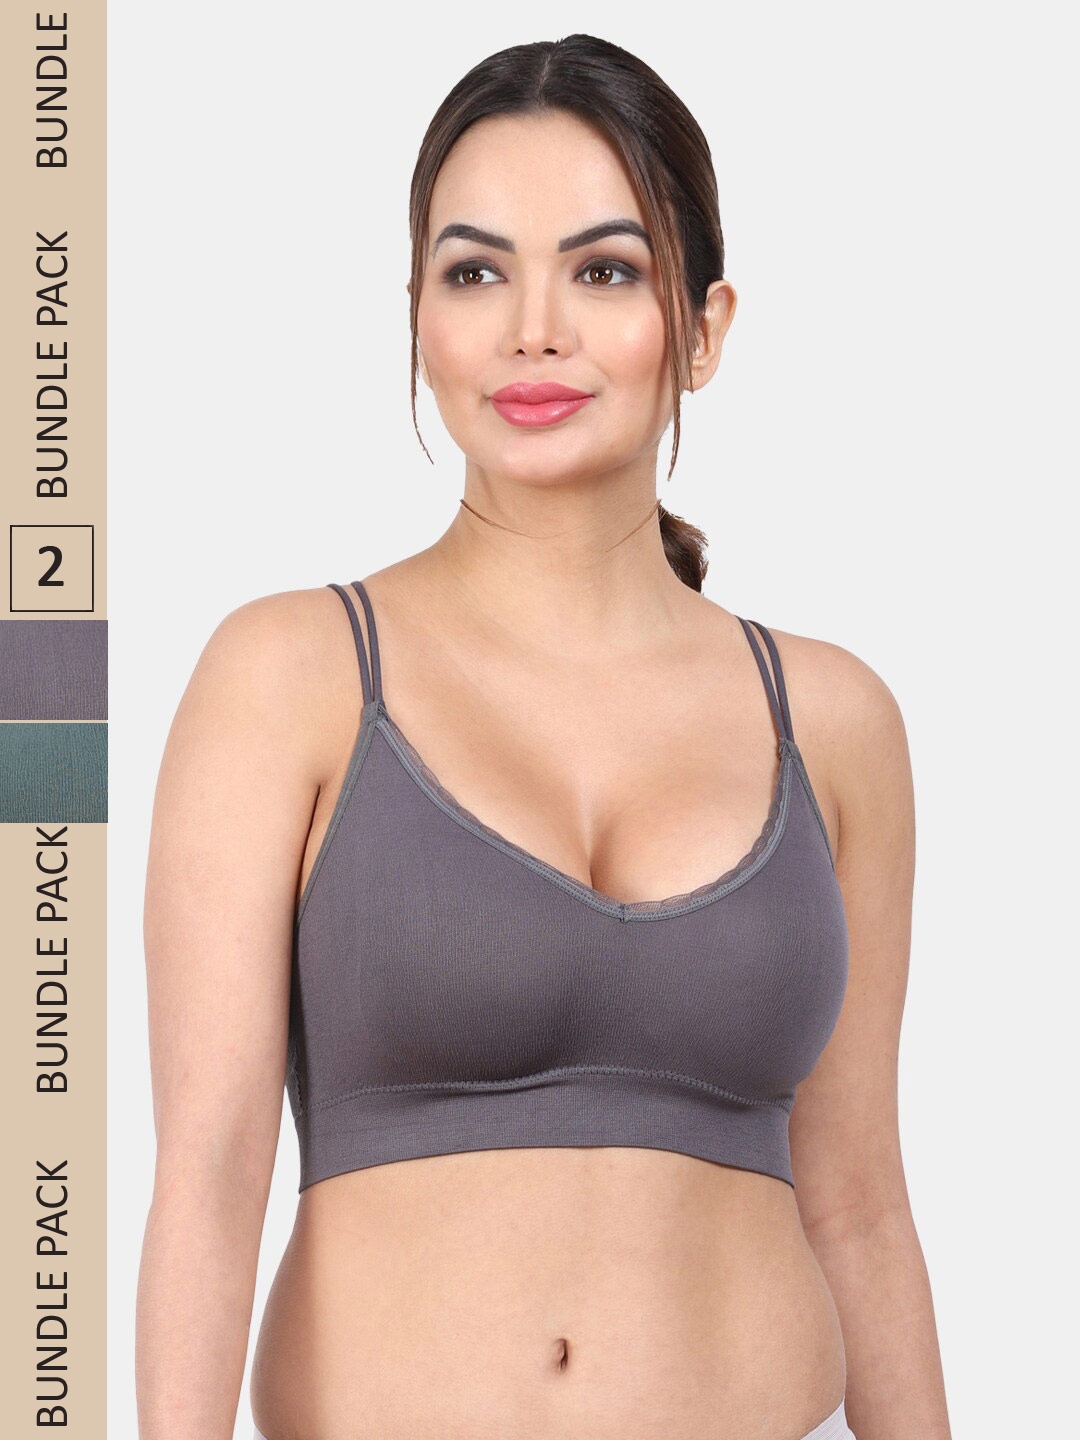 HRX by Hrithik Roshan Sports Bras on 80% off, buy 3 get extra 15% off, buy  4 get 40% off